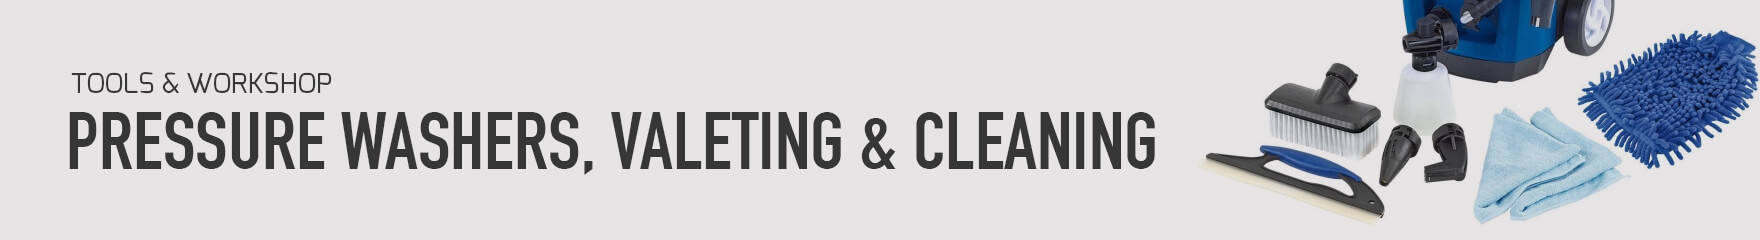 Pressure Washers, Valeting & Cleaning